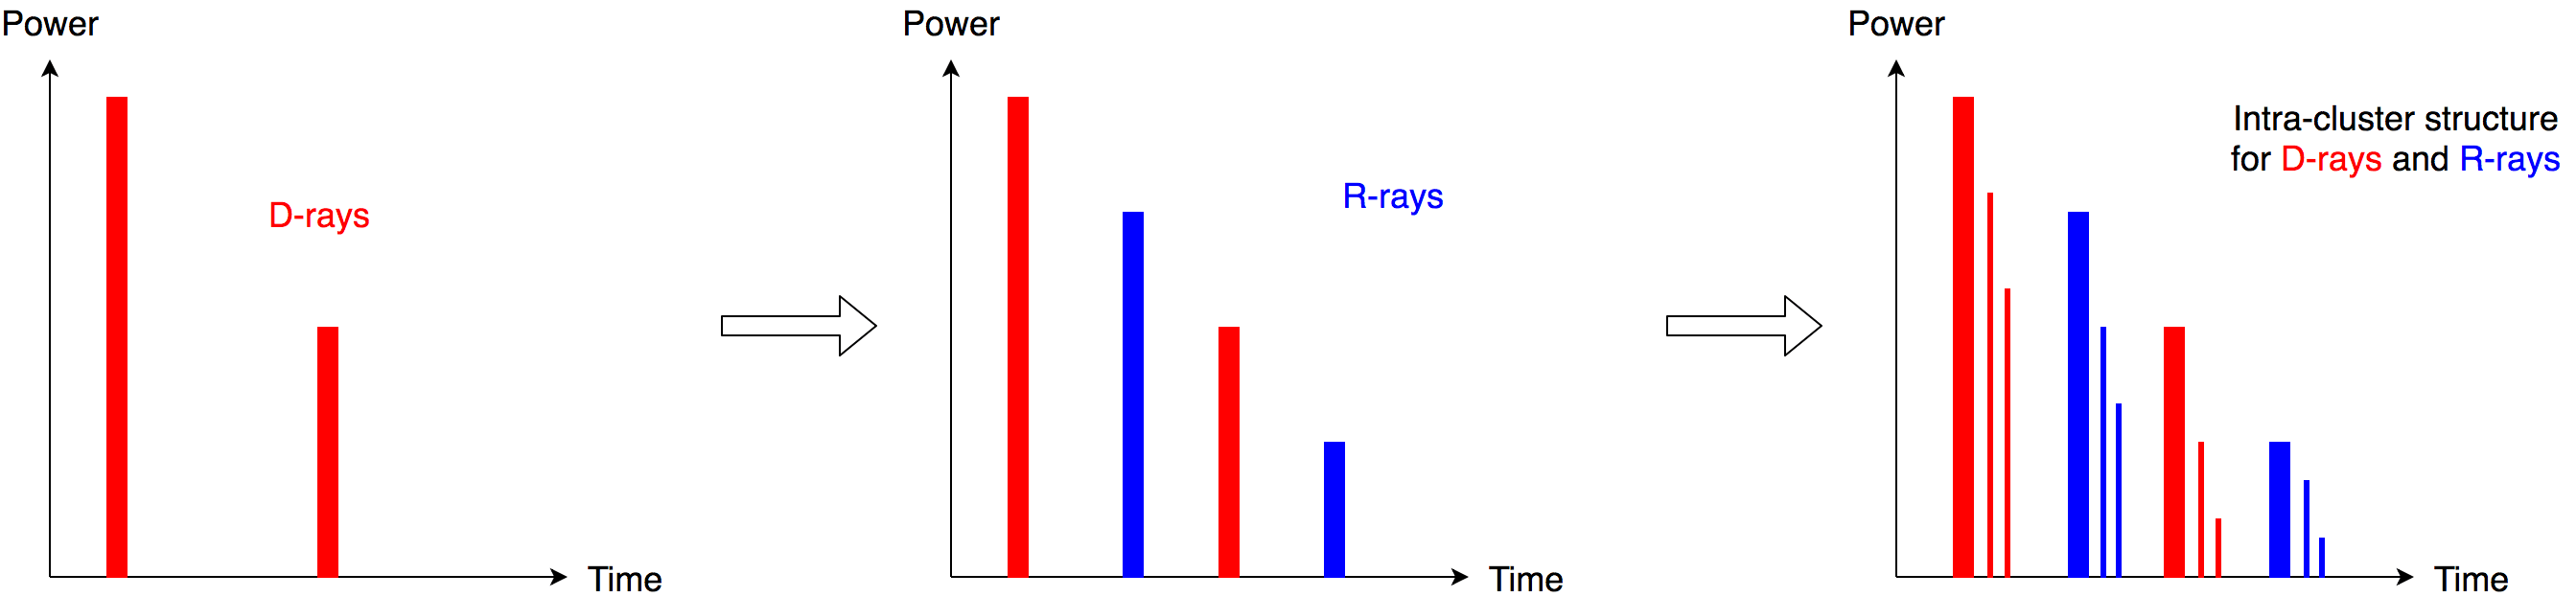 Figure contains three plots. The xlabel is time and ylabel is power for all the three plots. The first plot shows D-rays, the second plot shows R-rays, and the third plot shows the intra-cluster structure for D-rays and R-rays.